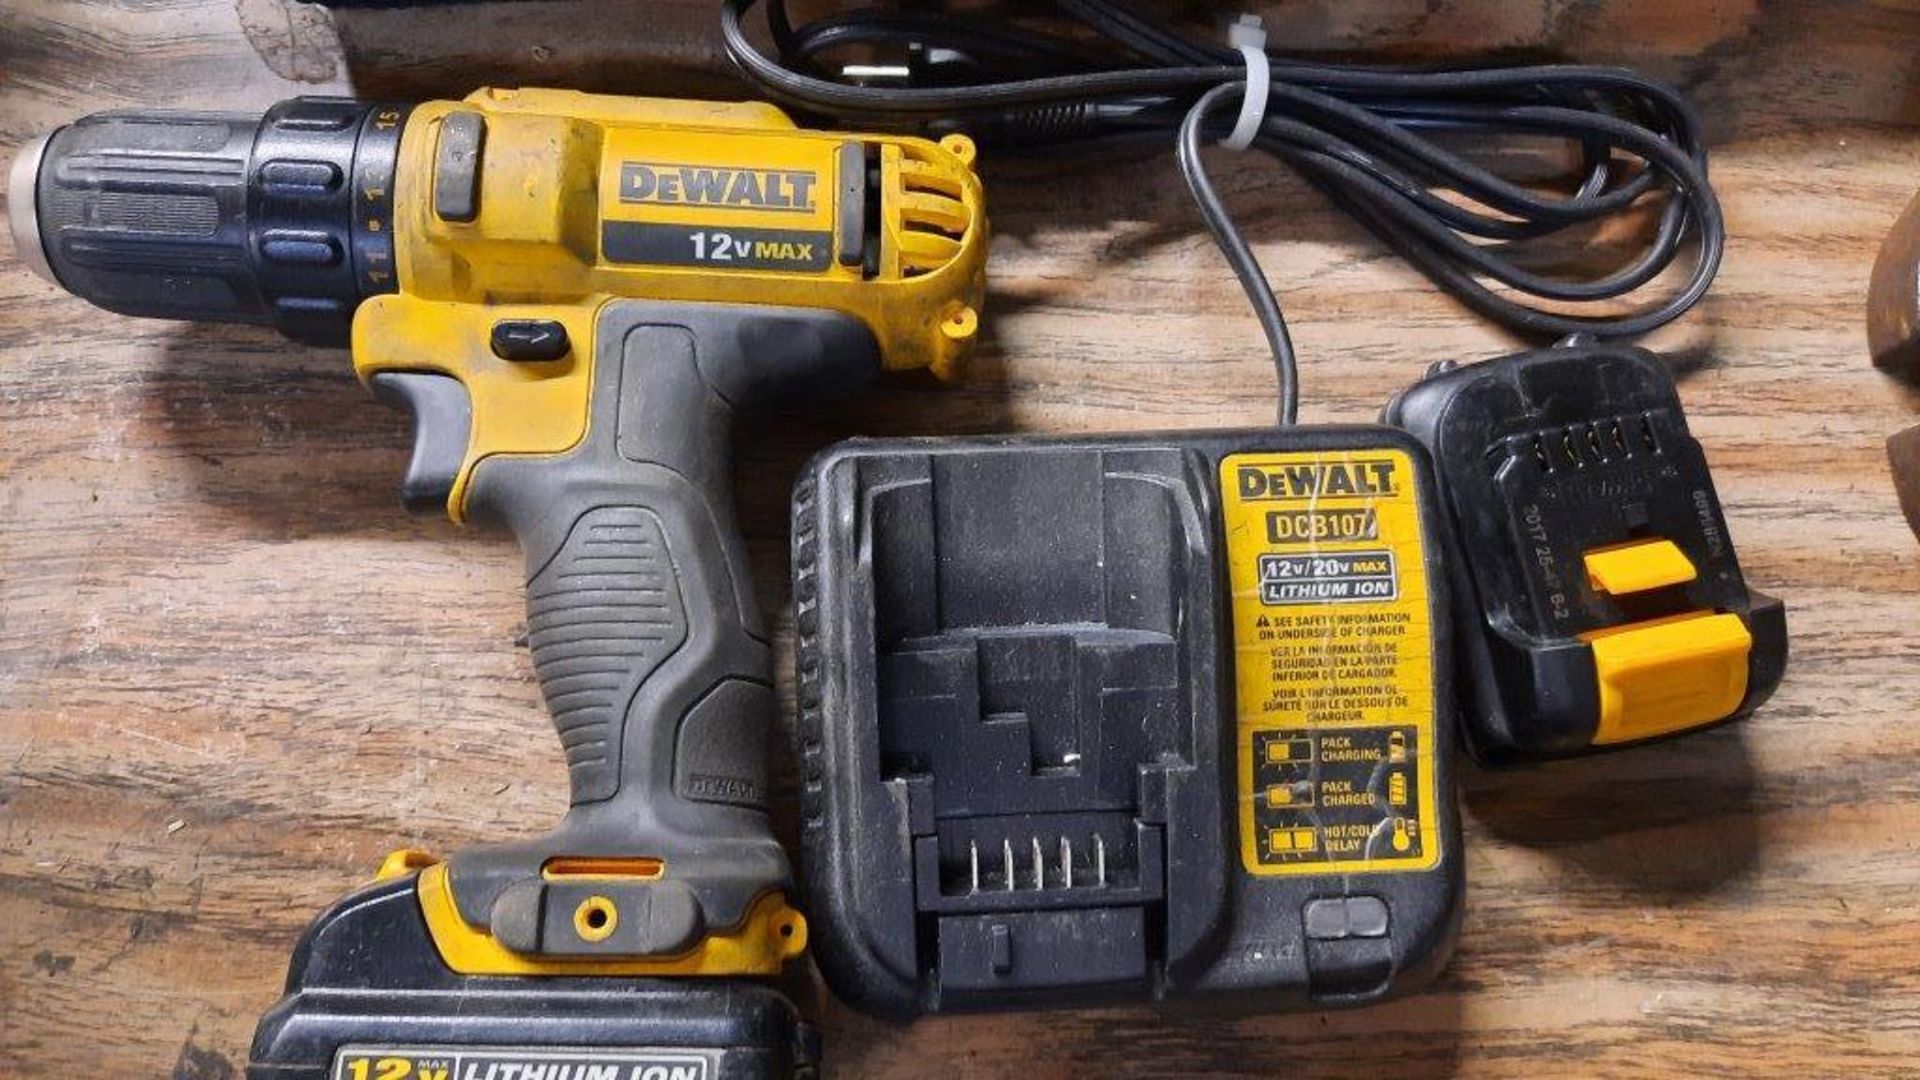 DEWALT Cordless Drill, c/w Charger, (2) Batteries & Carry Bag - Image 2 of 2